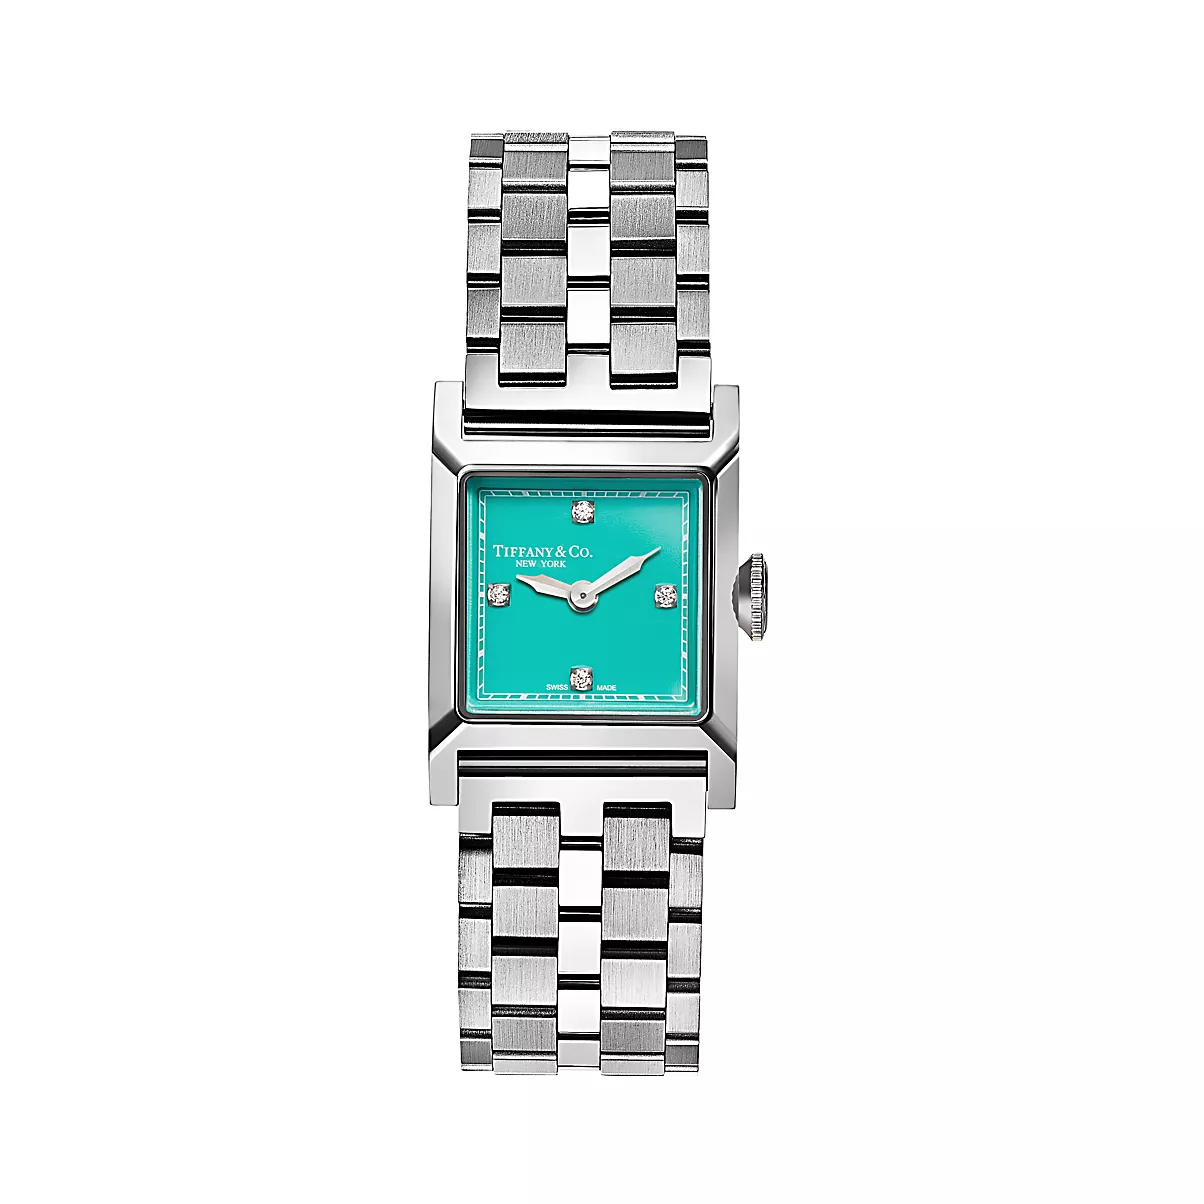 Union Square Watch Stainless Steel No color